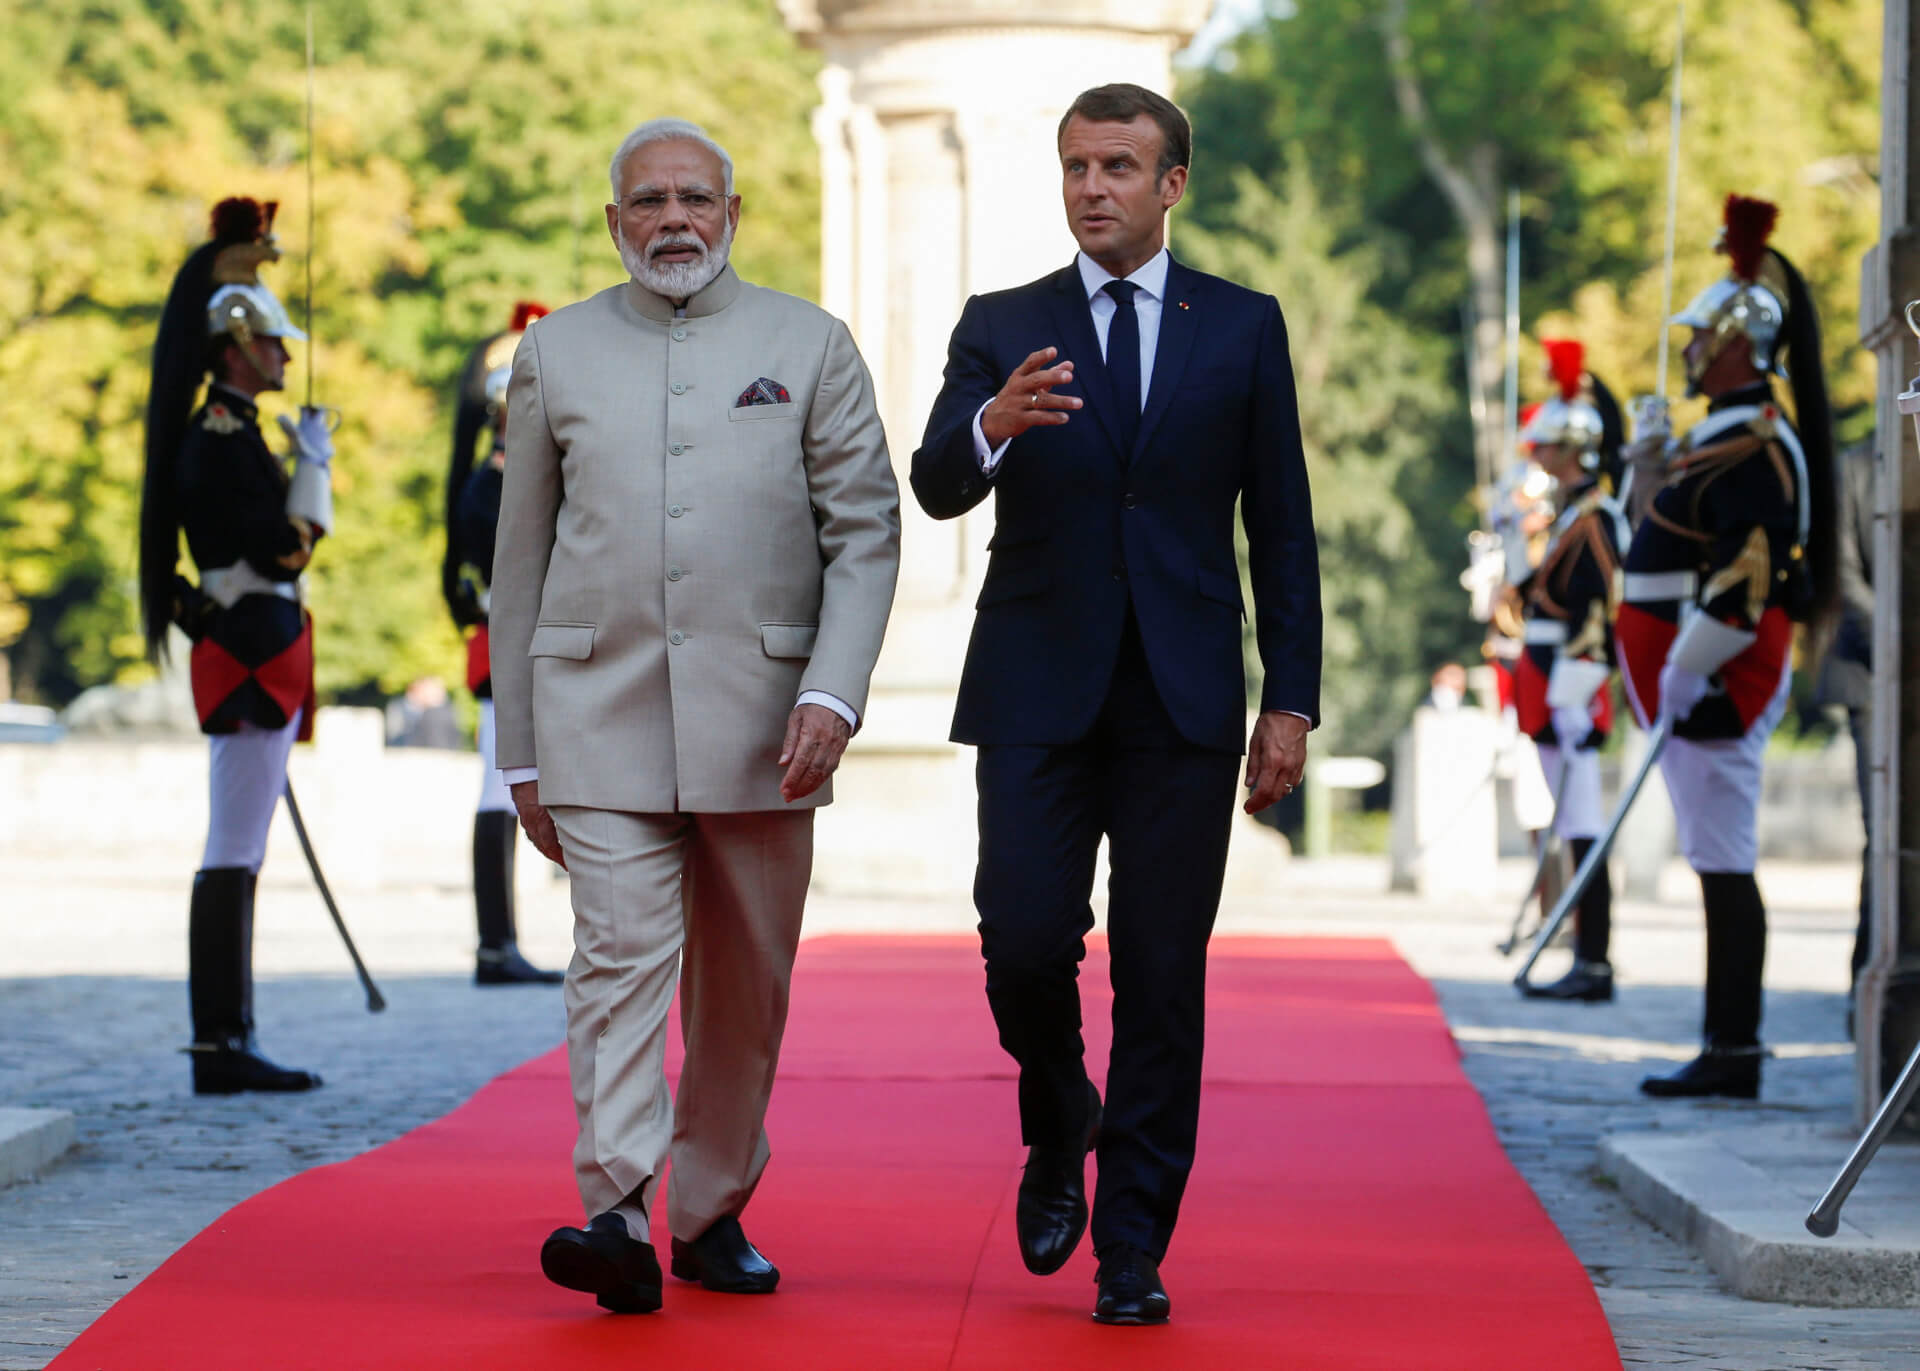 India Eyes More Submarines, Jet Engine Technology in PM Modi’s Upcoming France Visit